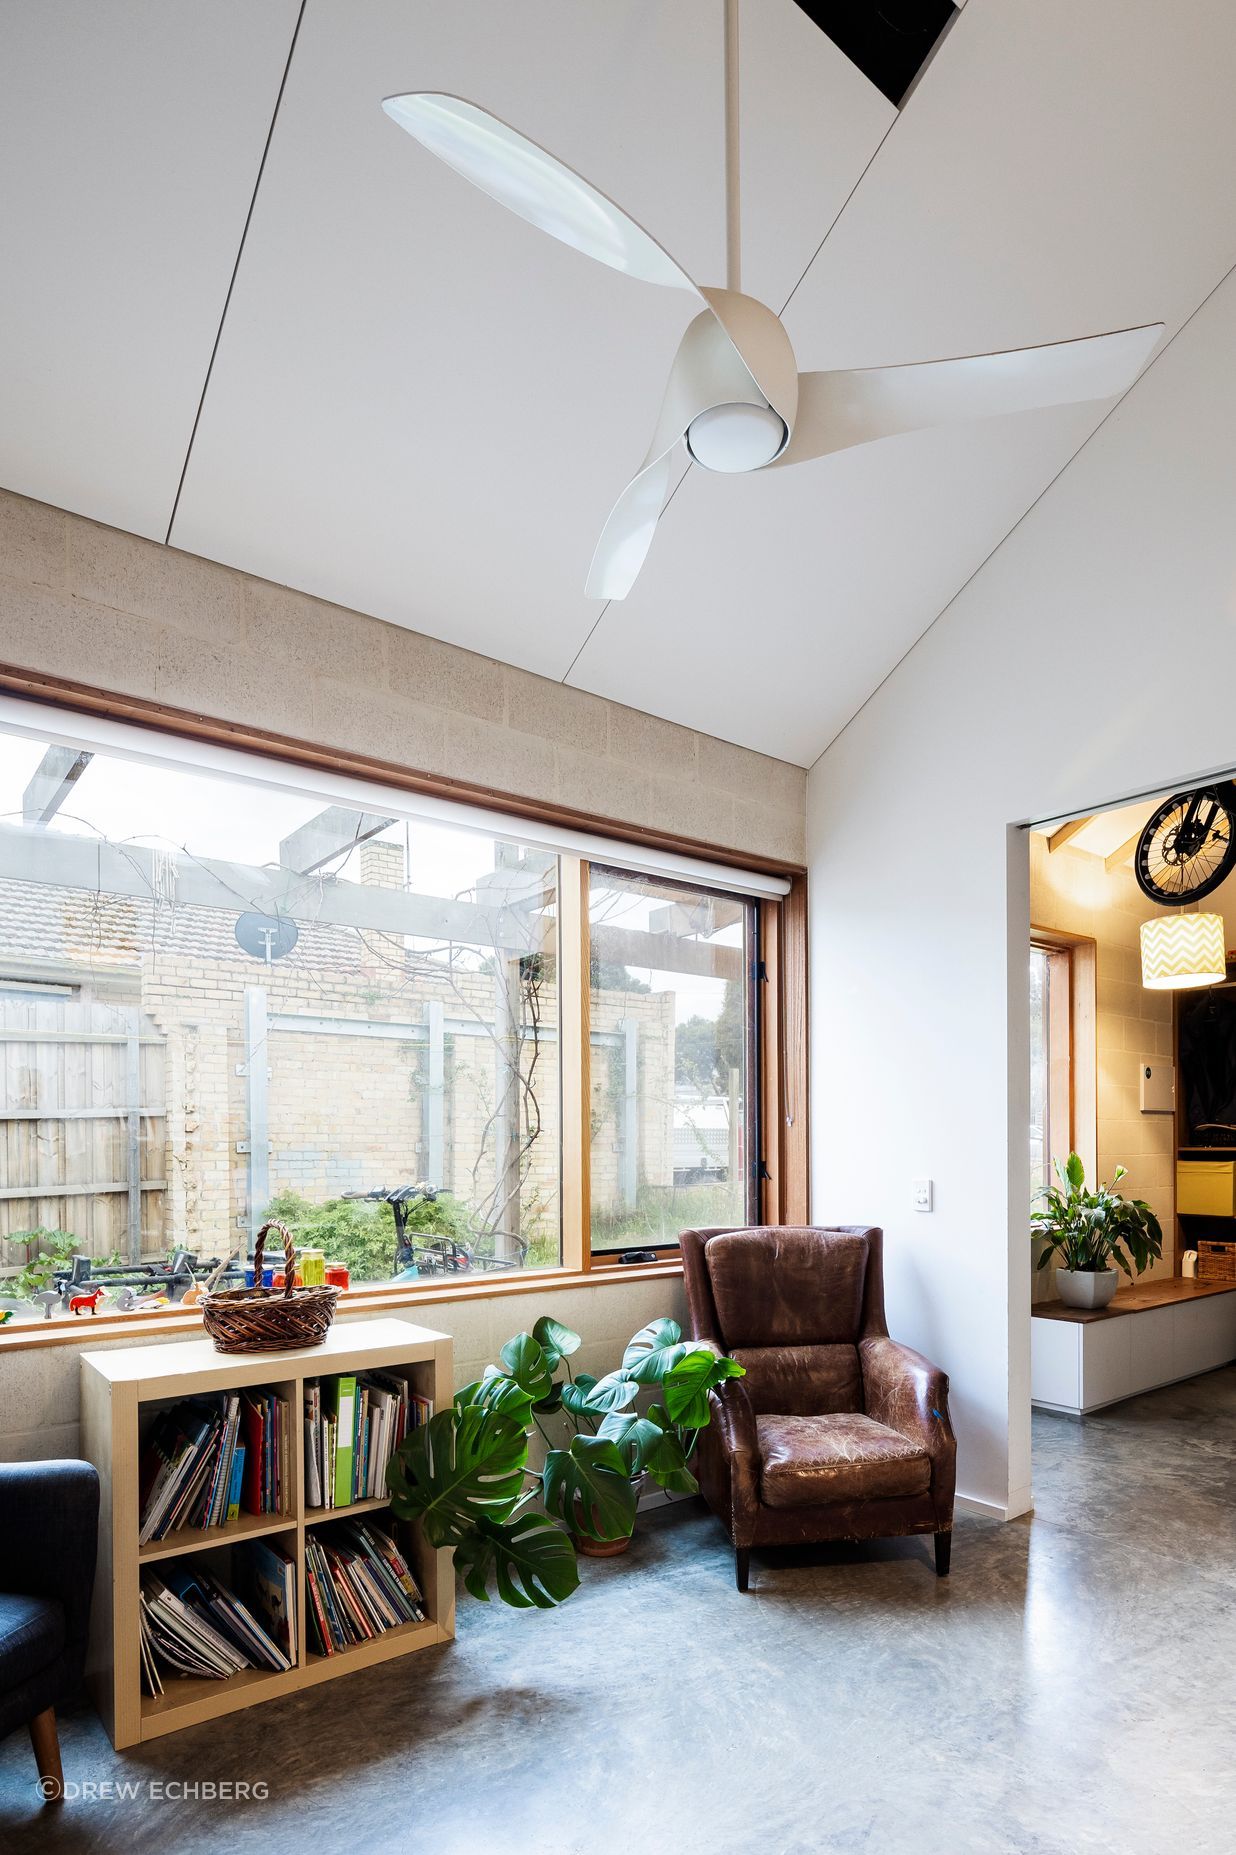 A sun-filled living room with lots of exposed internal thermal mass for heat storage